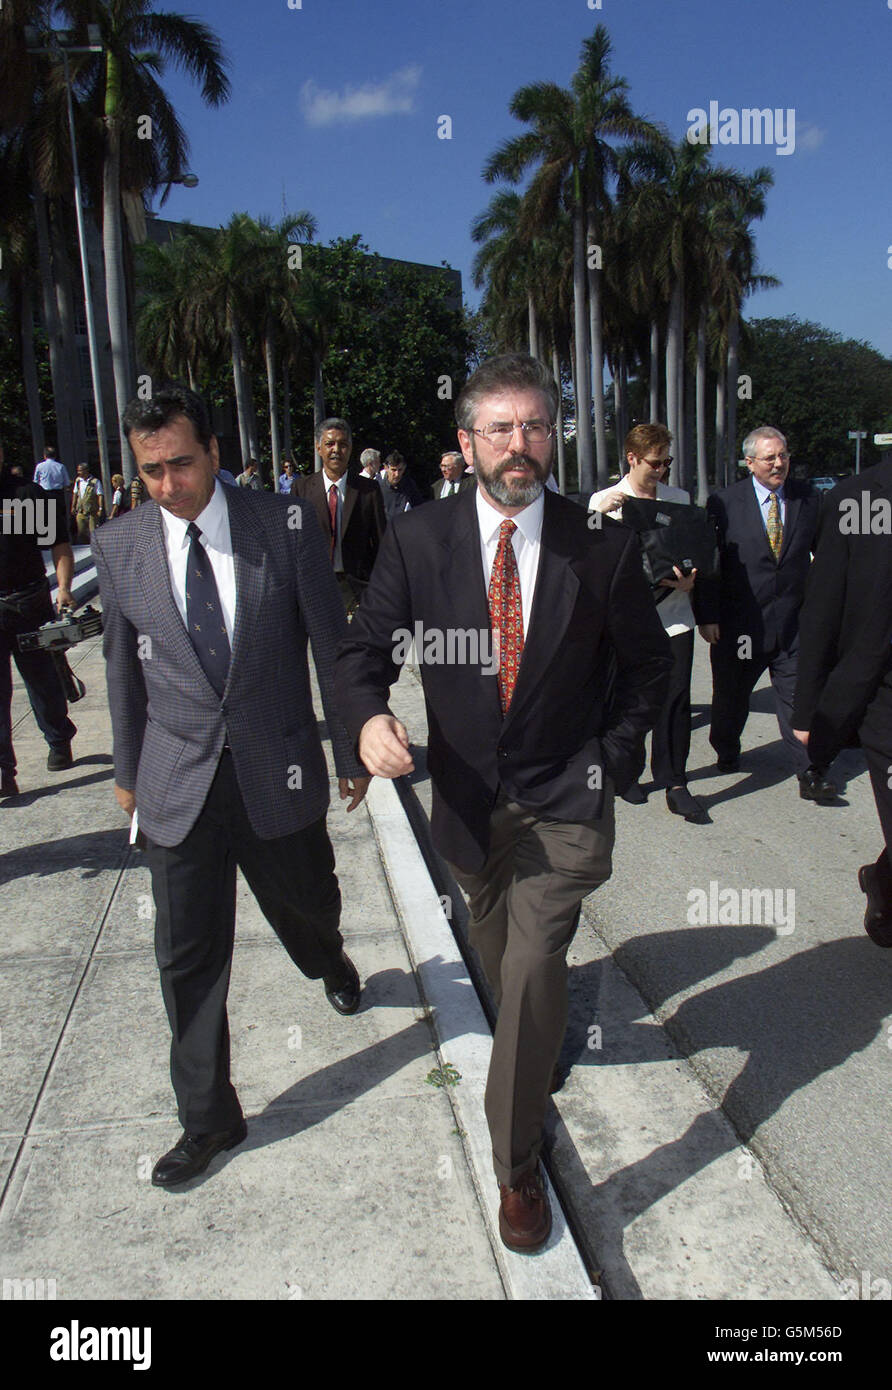 Sinn Fein President Gerry Adams arriving for a meeting in Havana, Cuba. Adams called for the release of three Irishmen imprisoned by Colombian authorities after a meeting with senior Cuban government officials. Stock Photo